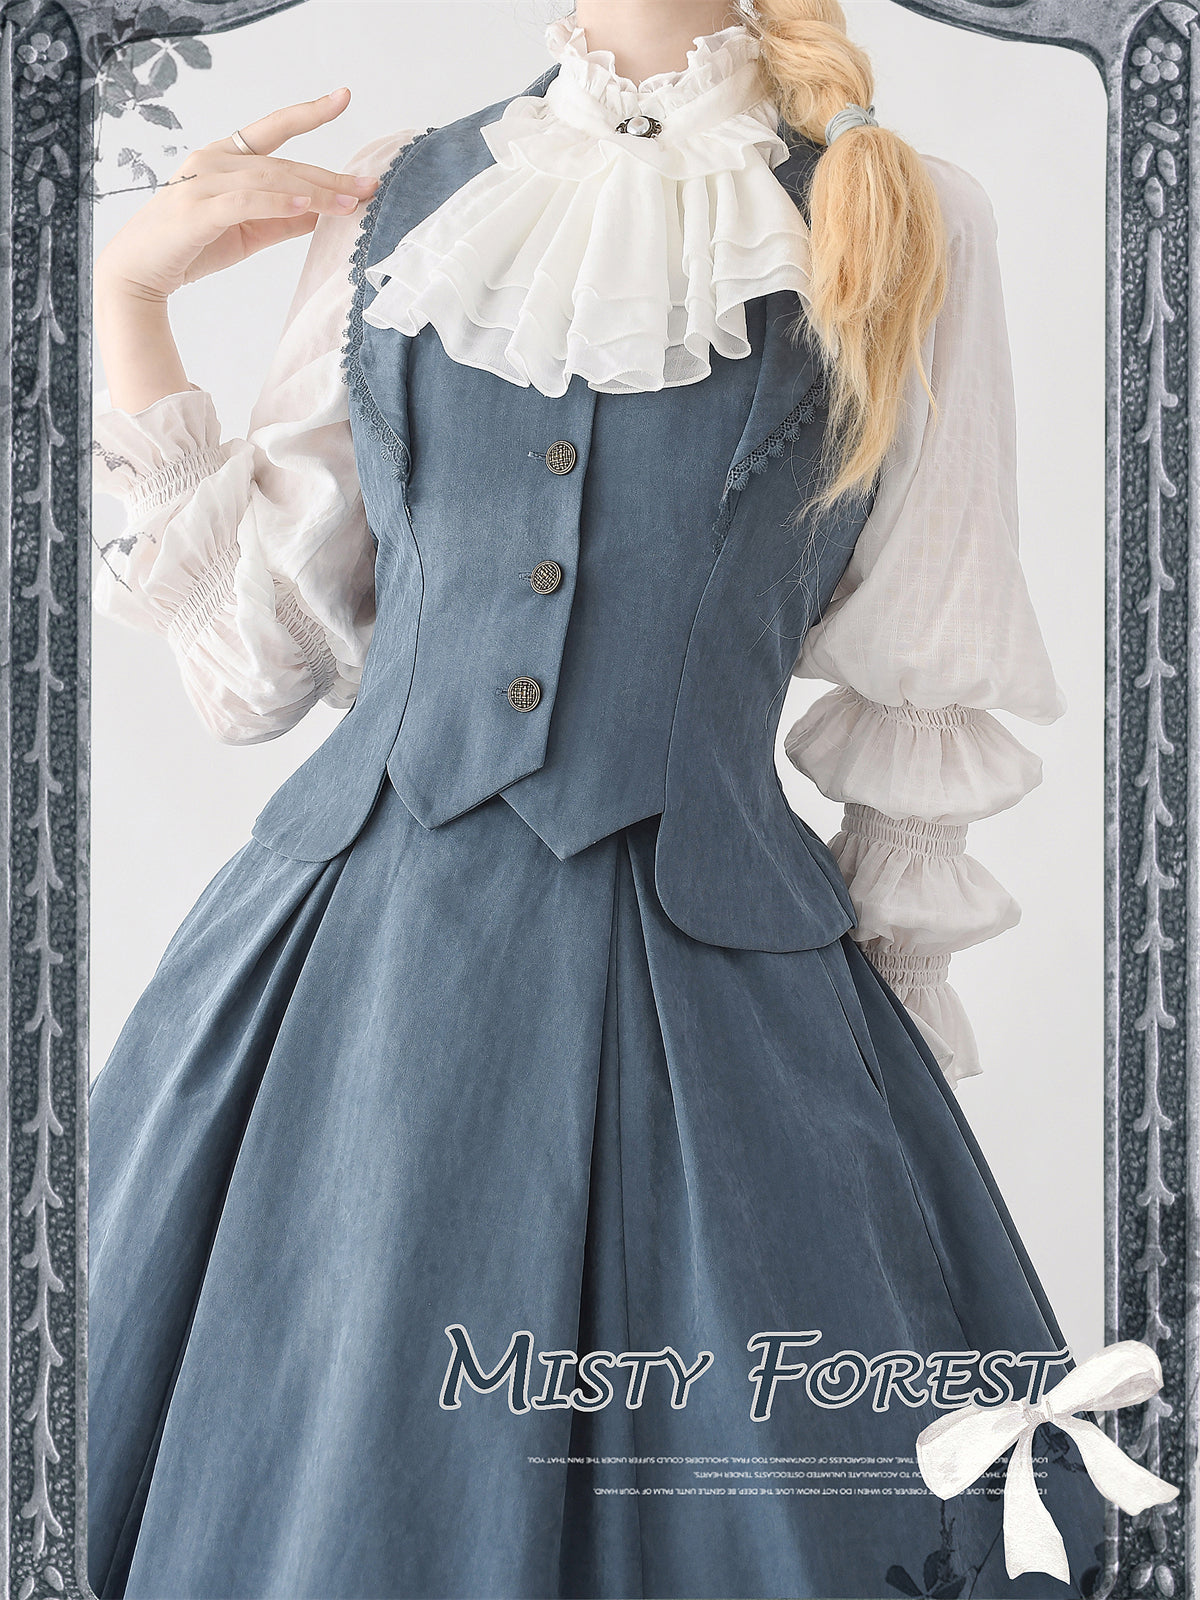 Misty Forest blouse with jabot [20% off when purchased together]